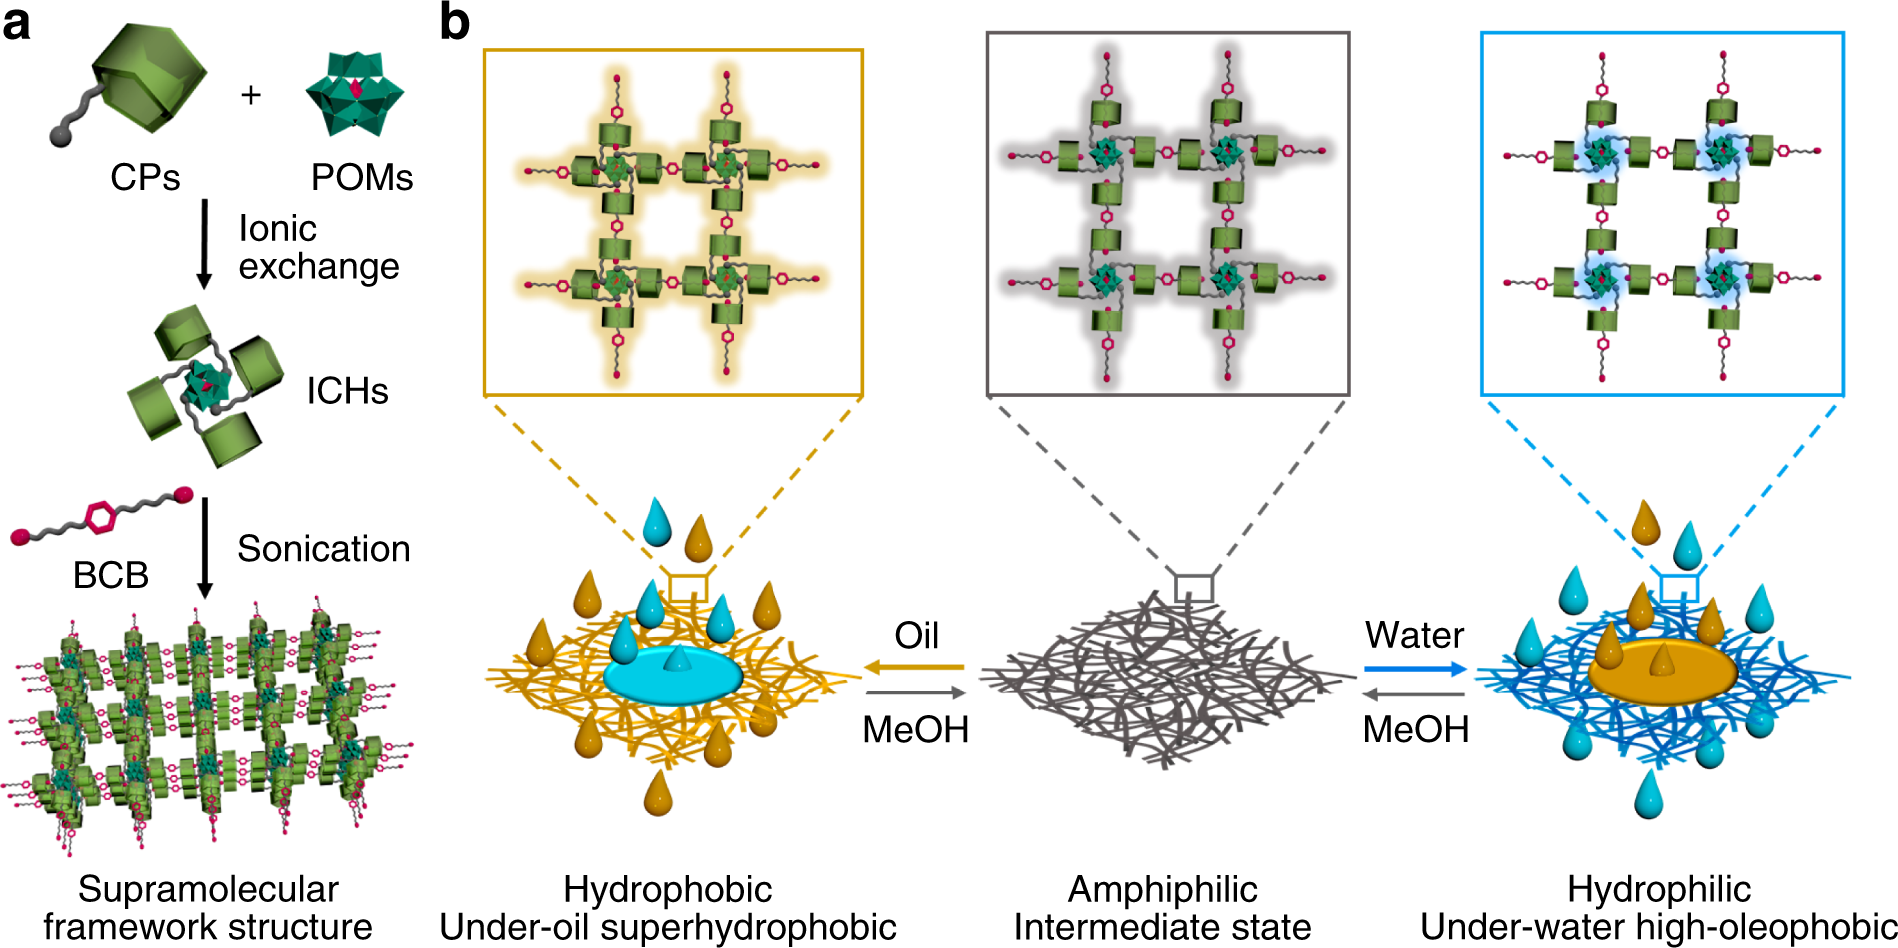 Macroscopic covalent organic framework architectures for water